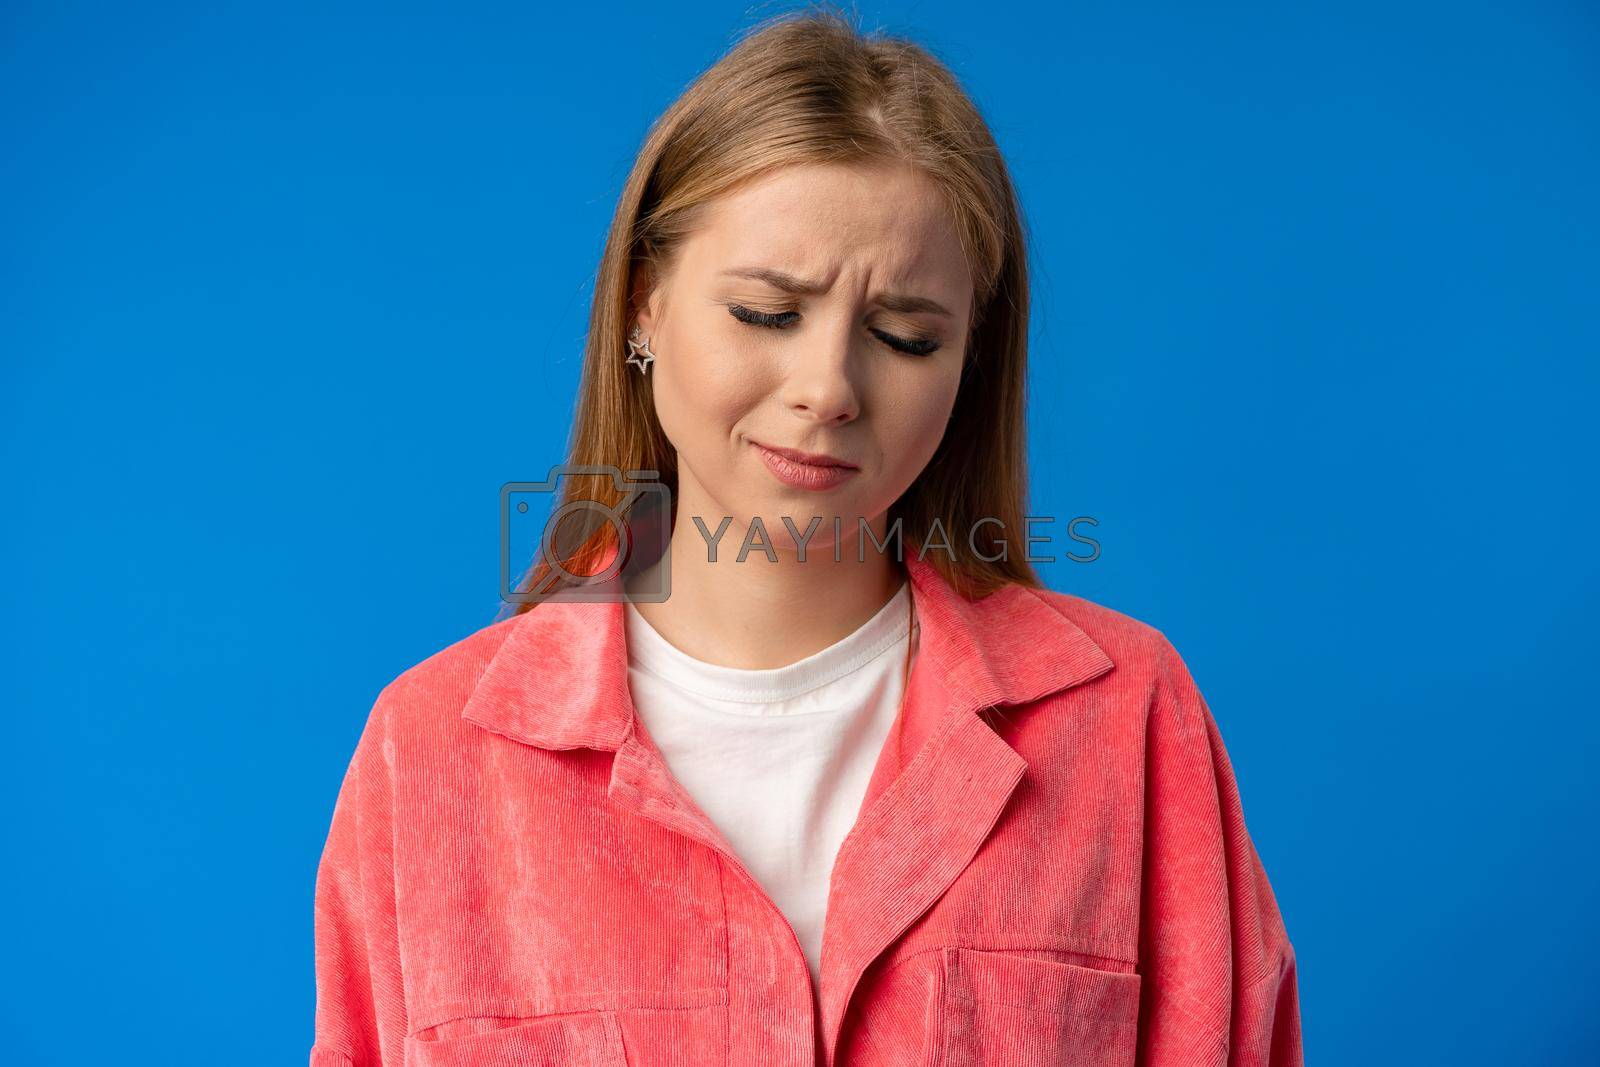 Royalty free image of Negative nervous young woman in trouble over blue background by Fabrikasimf